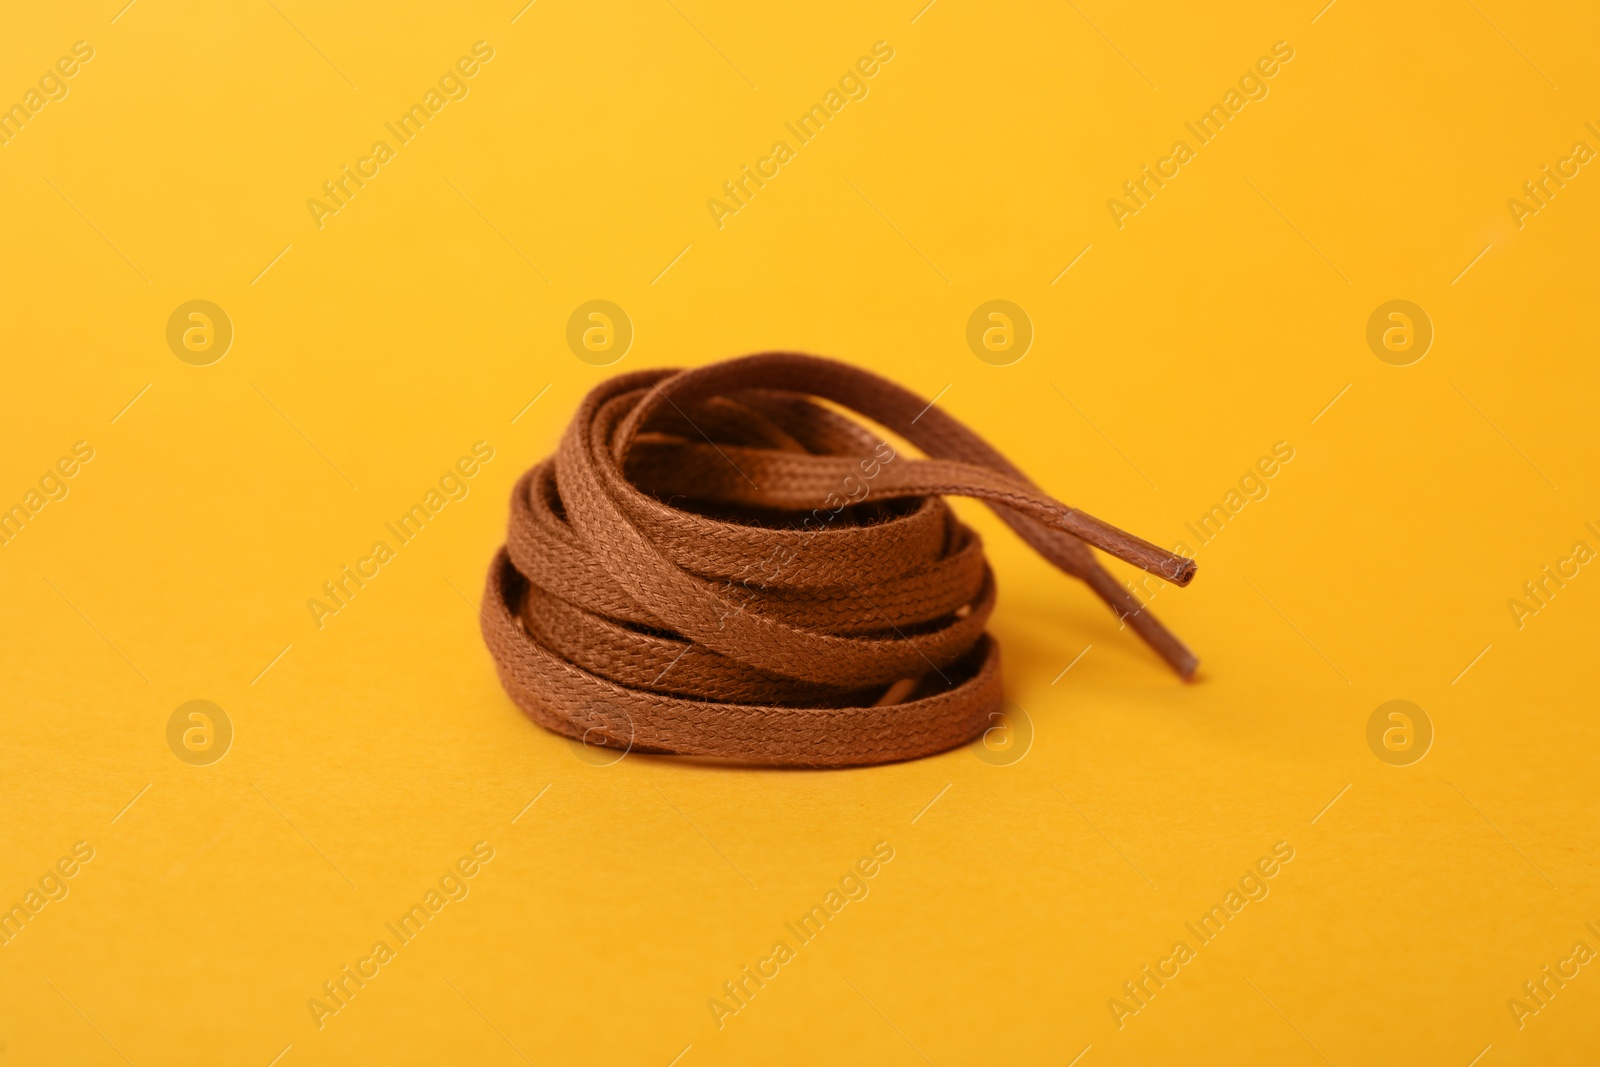 Photo of Brown shoe lace on yellow background. Stylish accessory